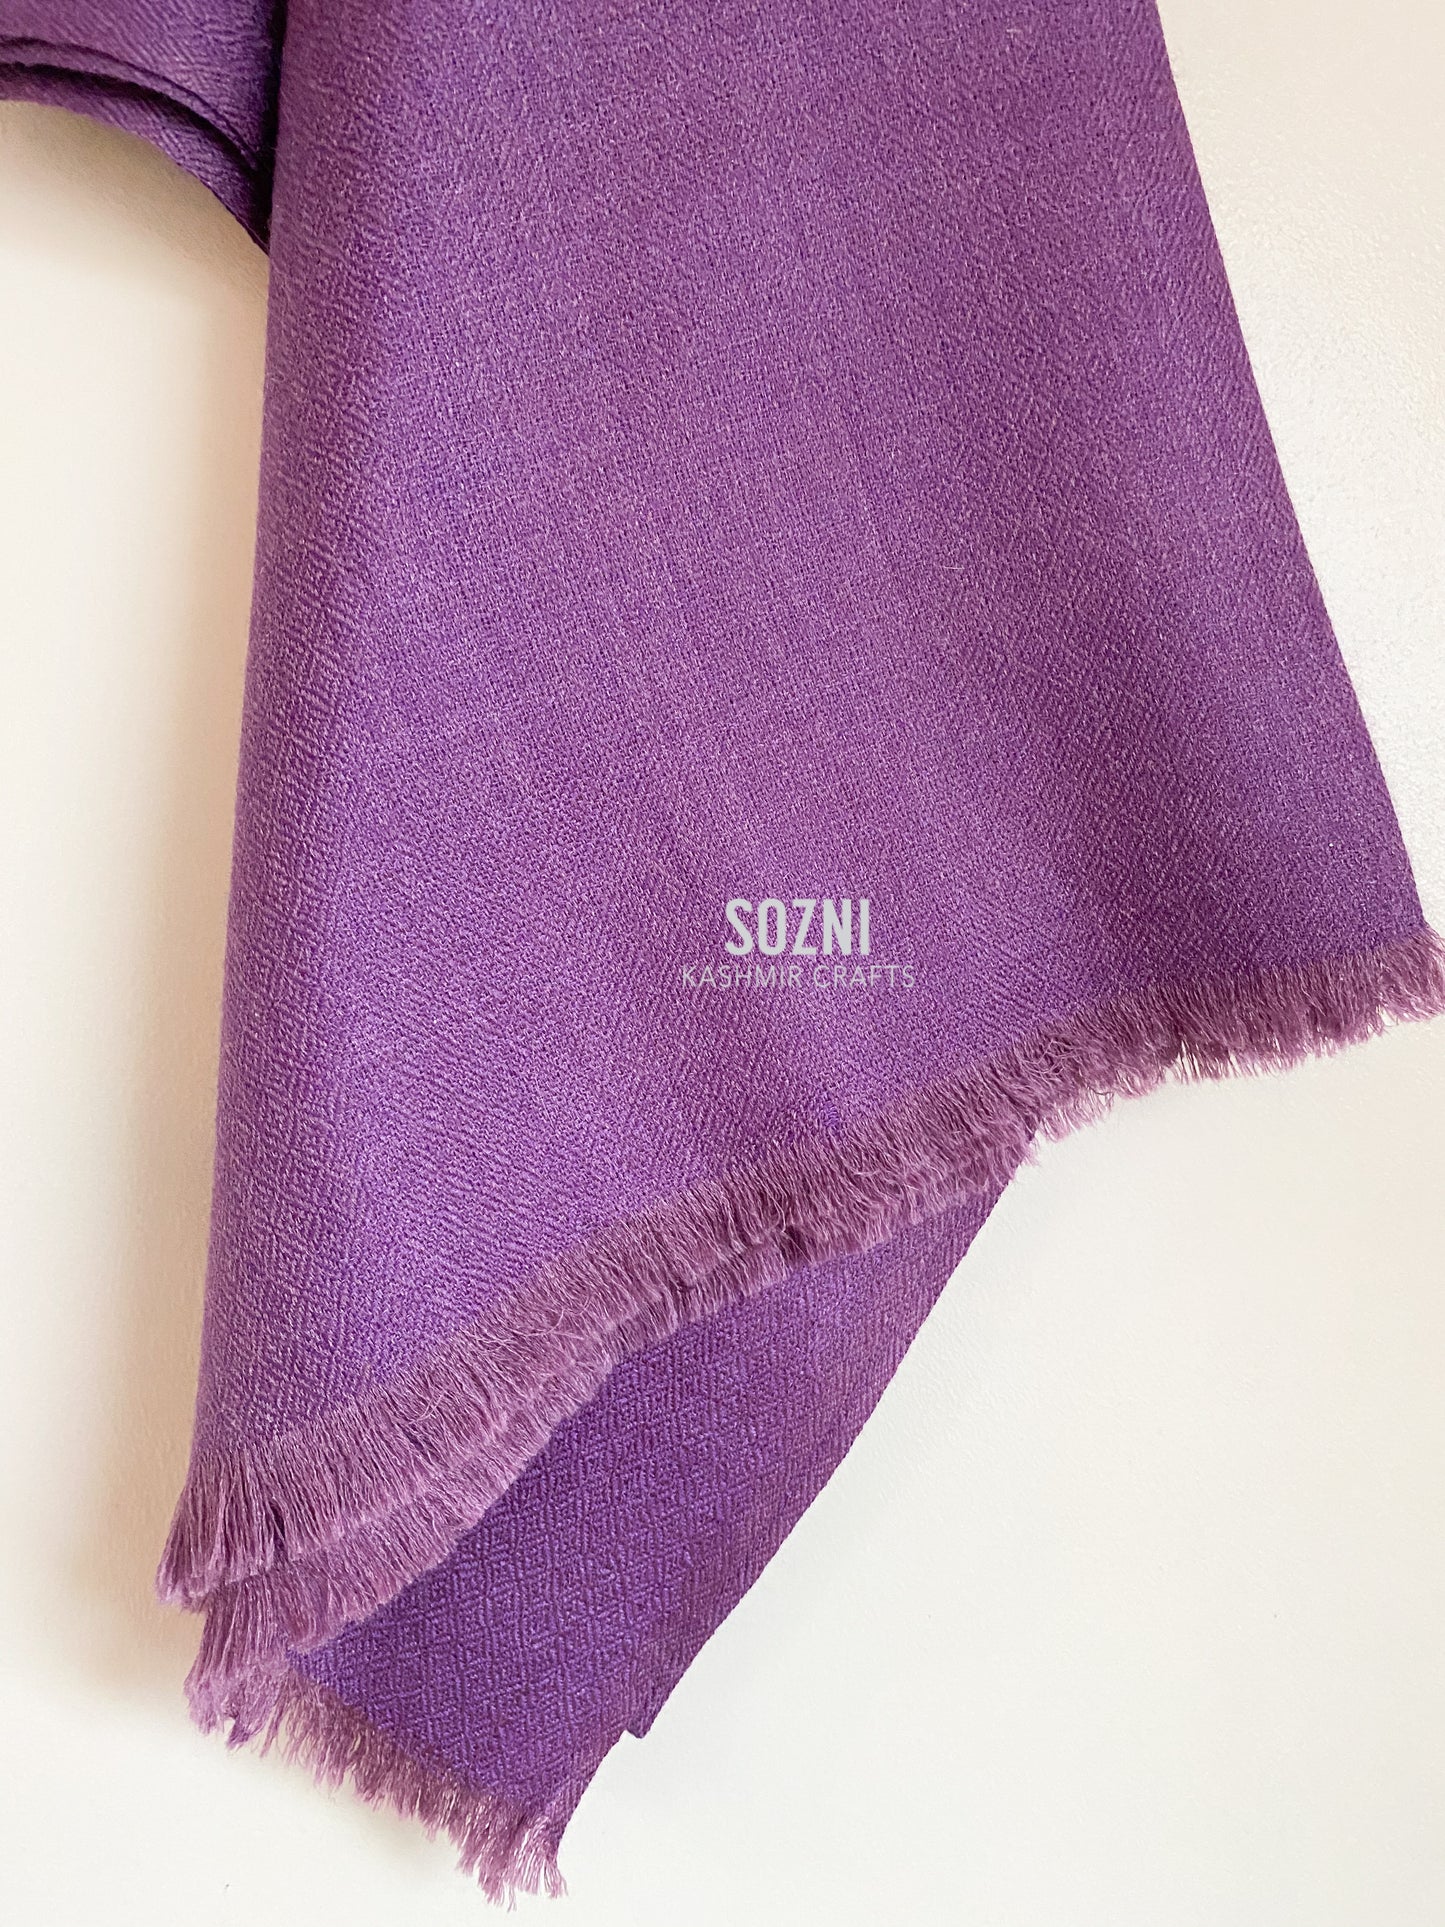 Cashmere wool Scarf from Kashmir